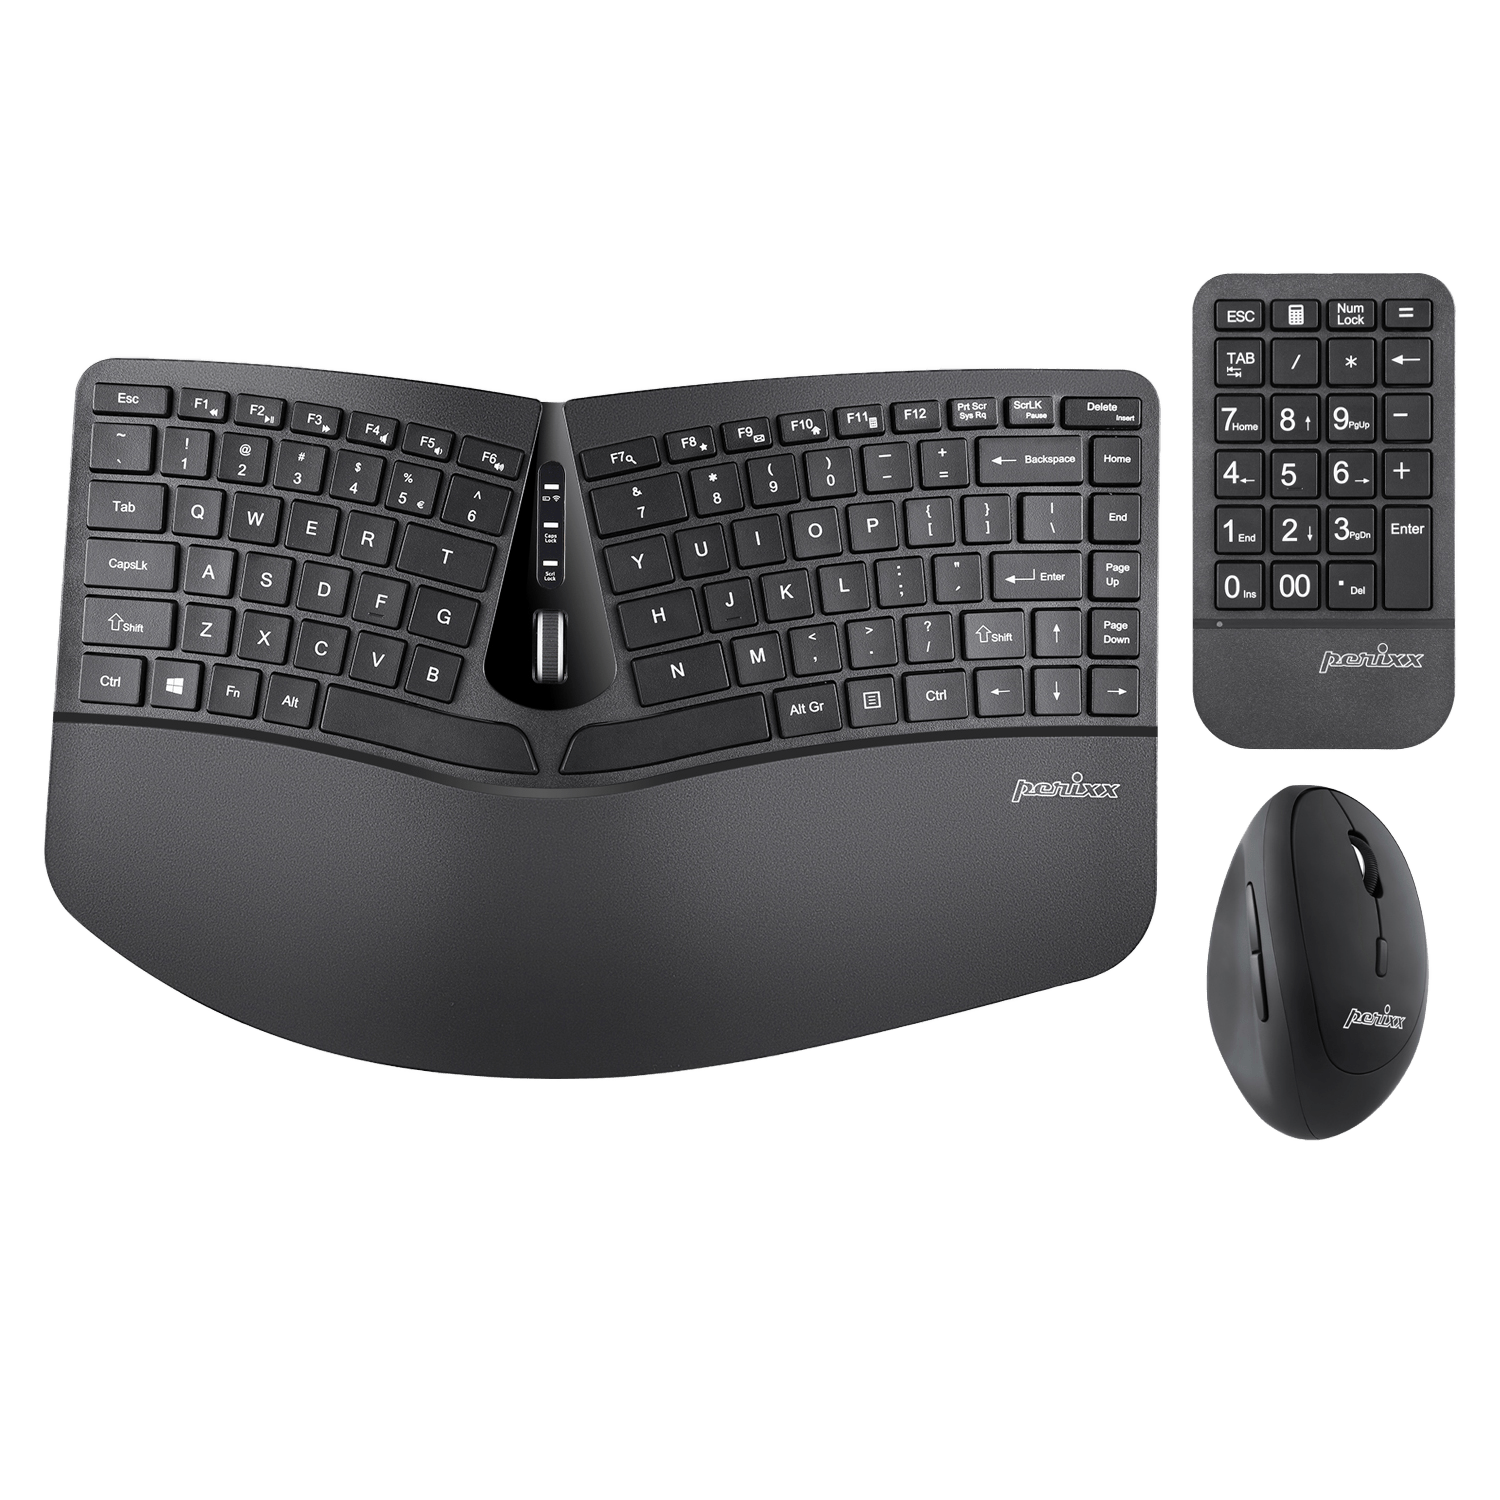 PERIDUO-606A - Wireless Ergonomic Combo (75% Keyboard, Number Pad, and Vertical Mouse) - Perixx Europe